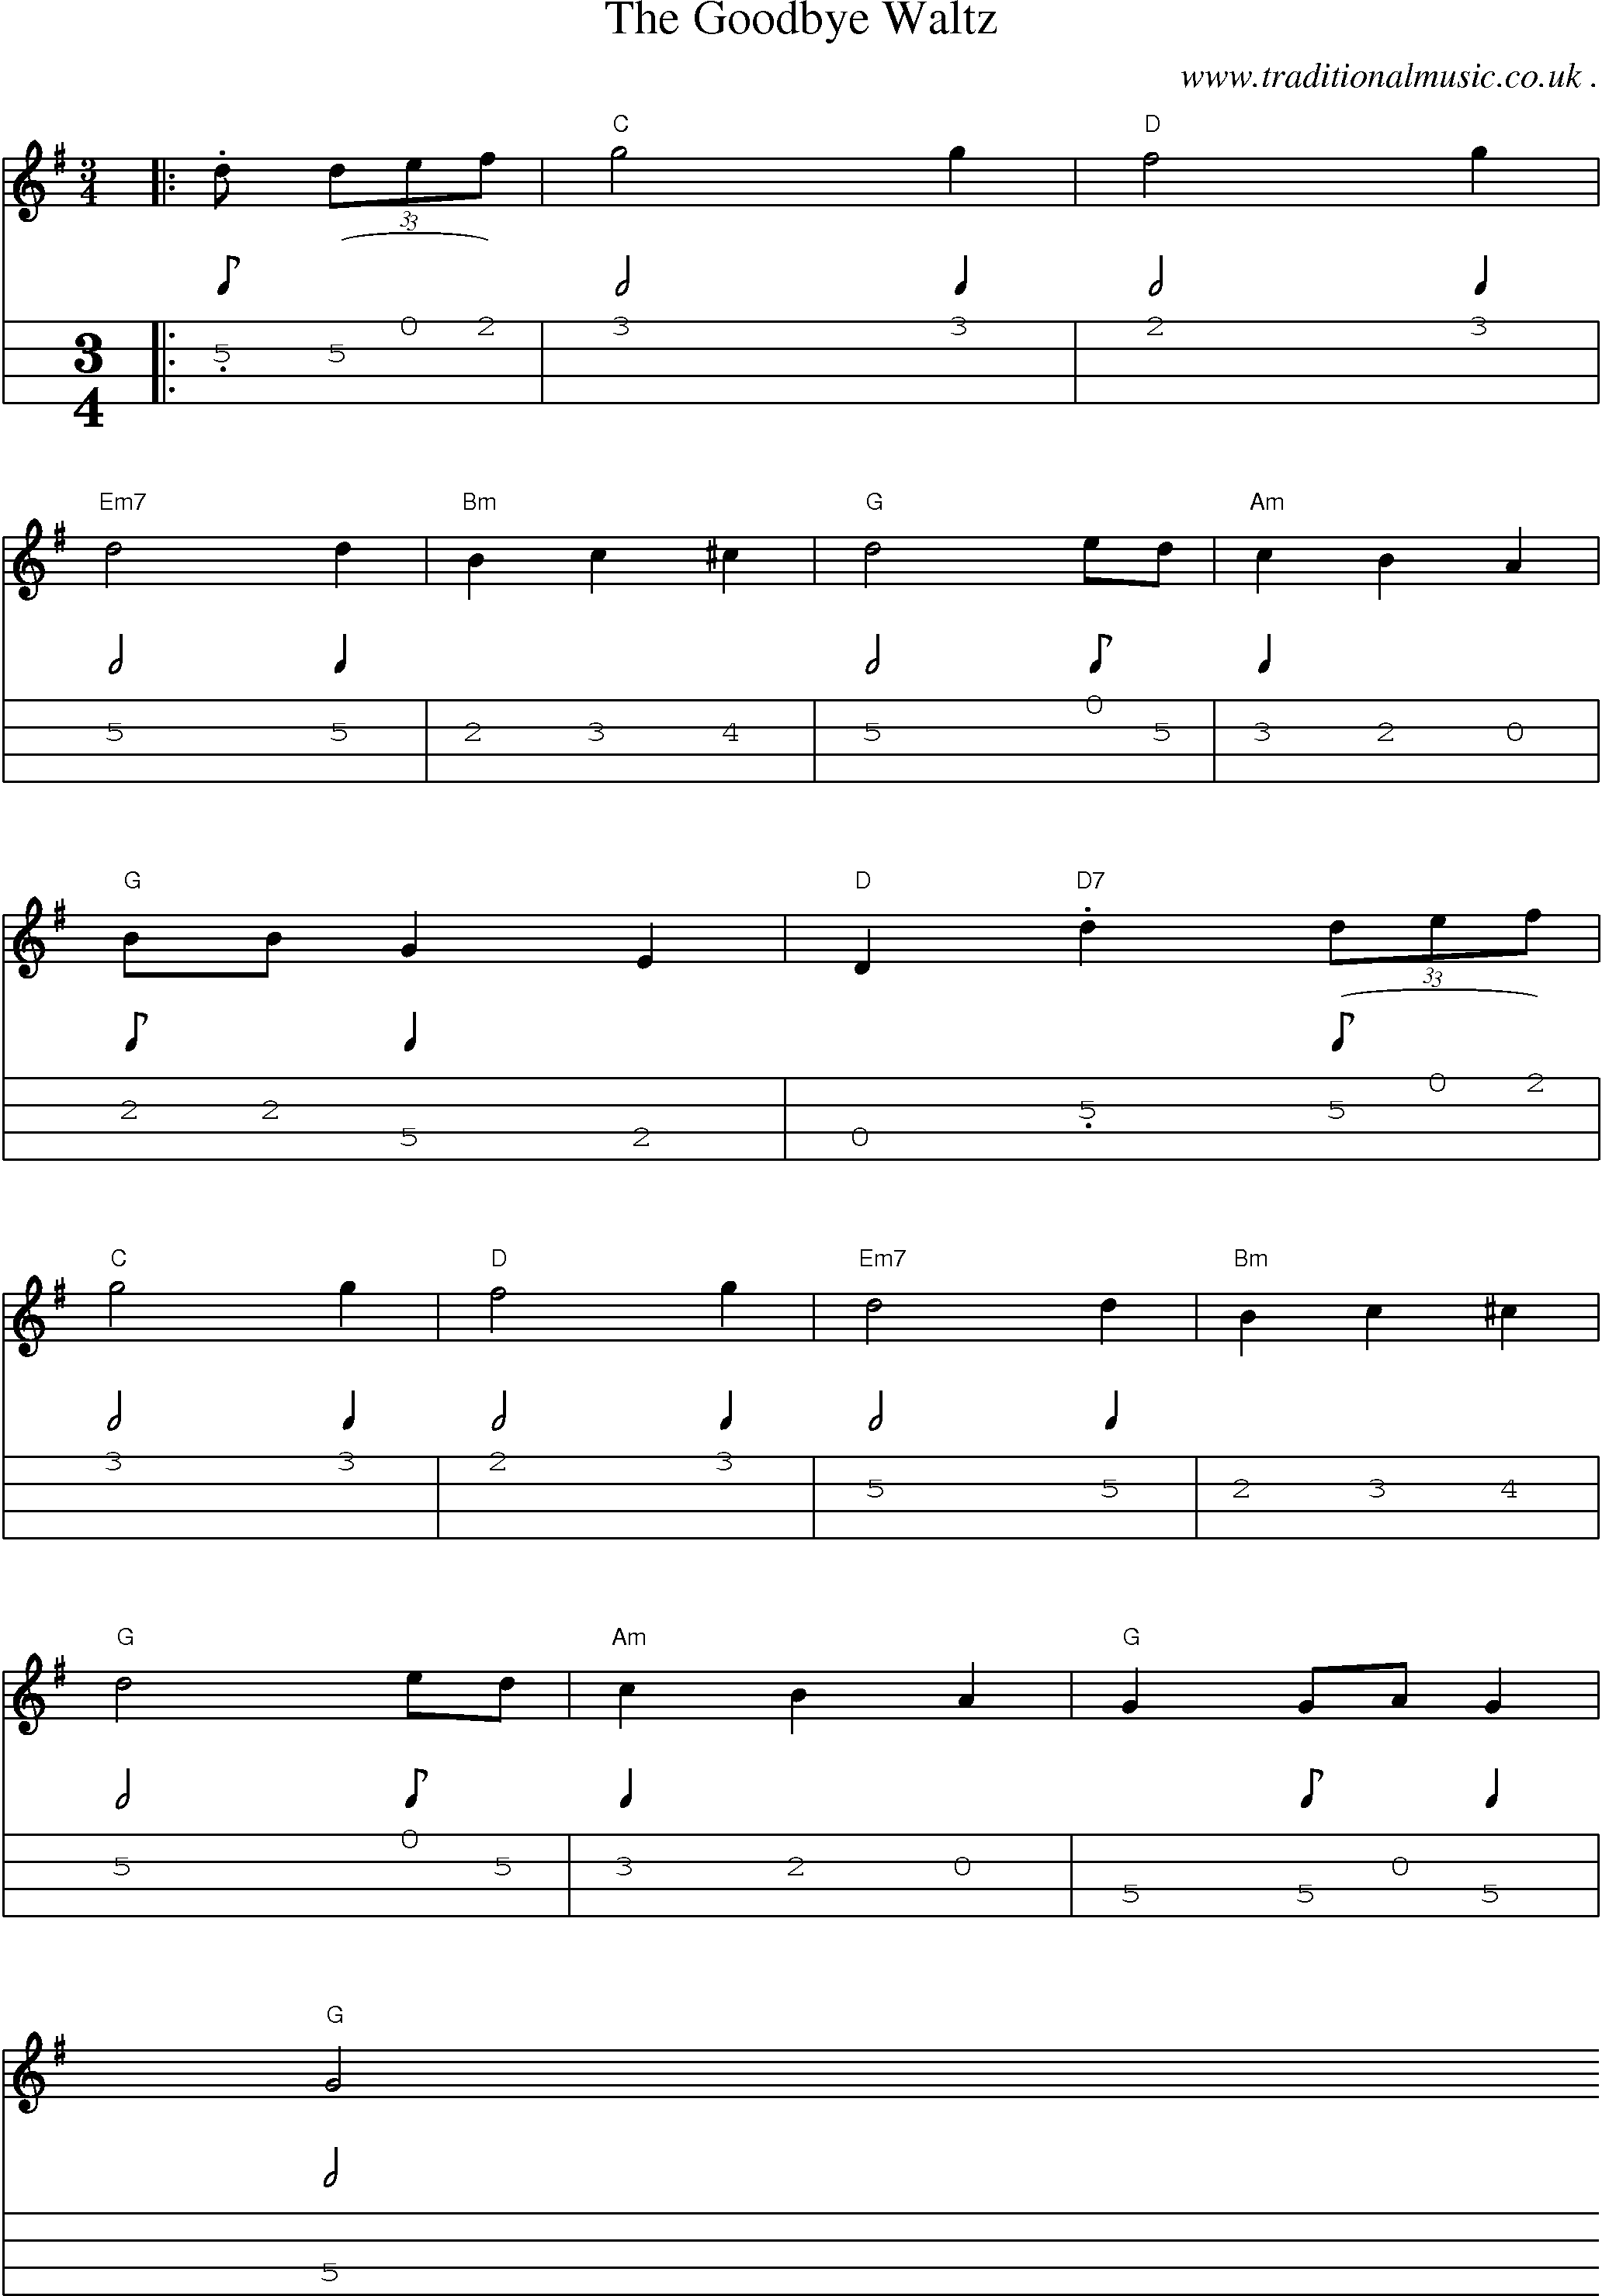 Sheet-Music and Mandolin Tabs for The Goodbye Waltz